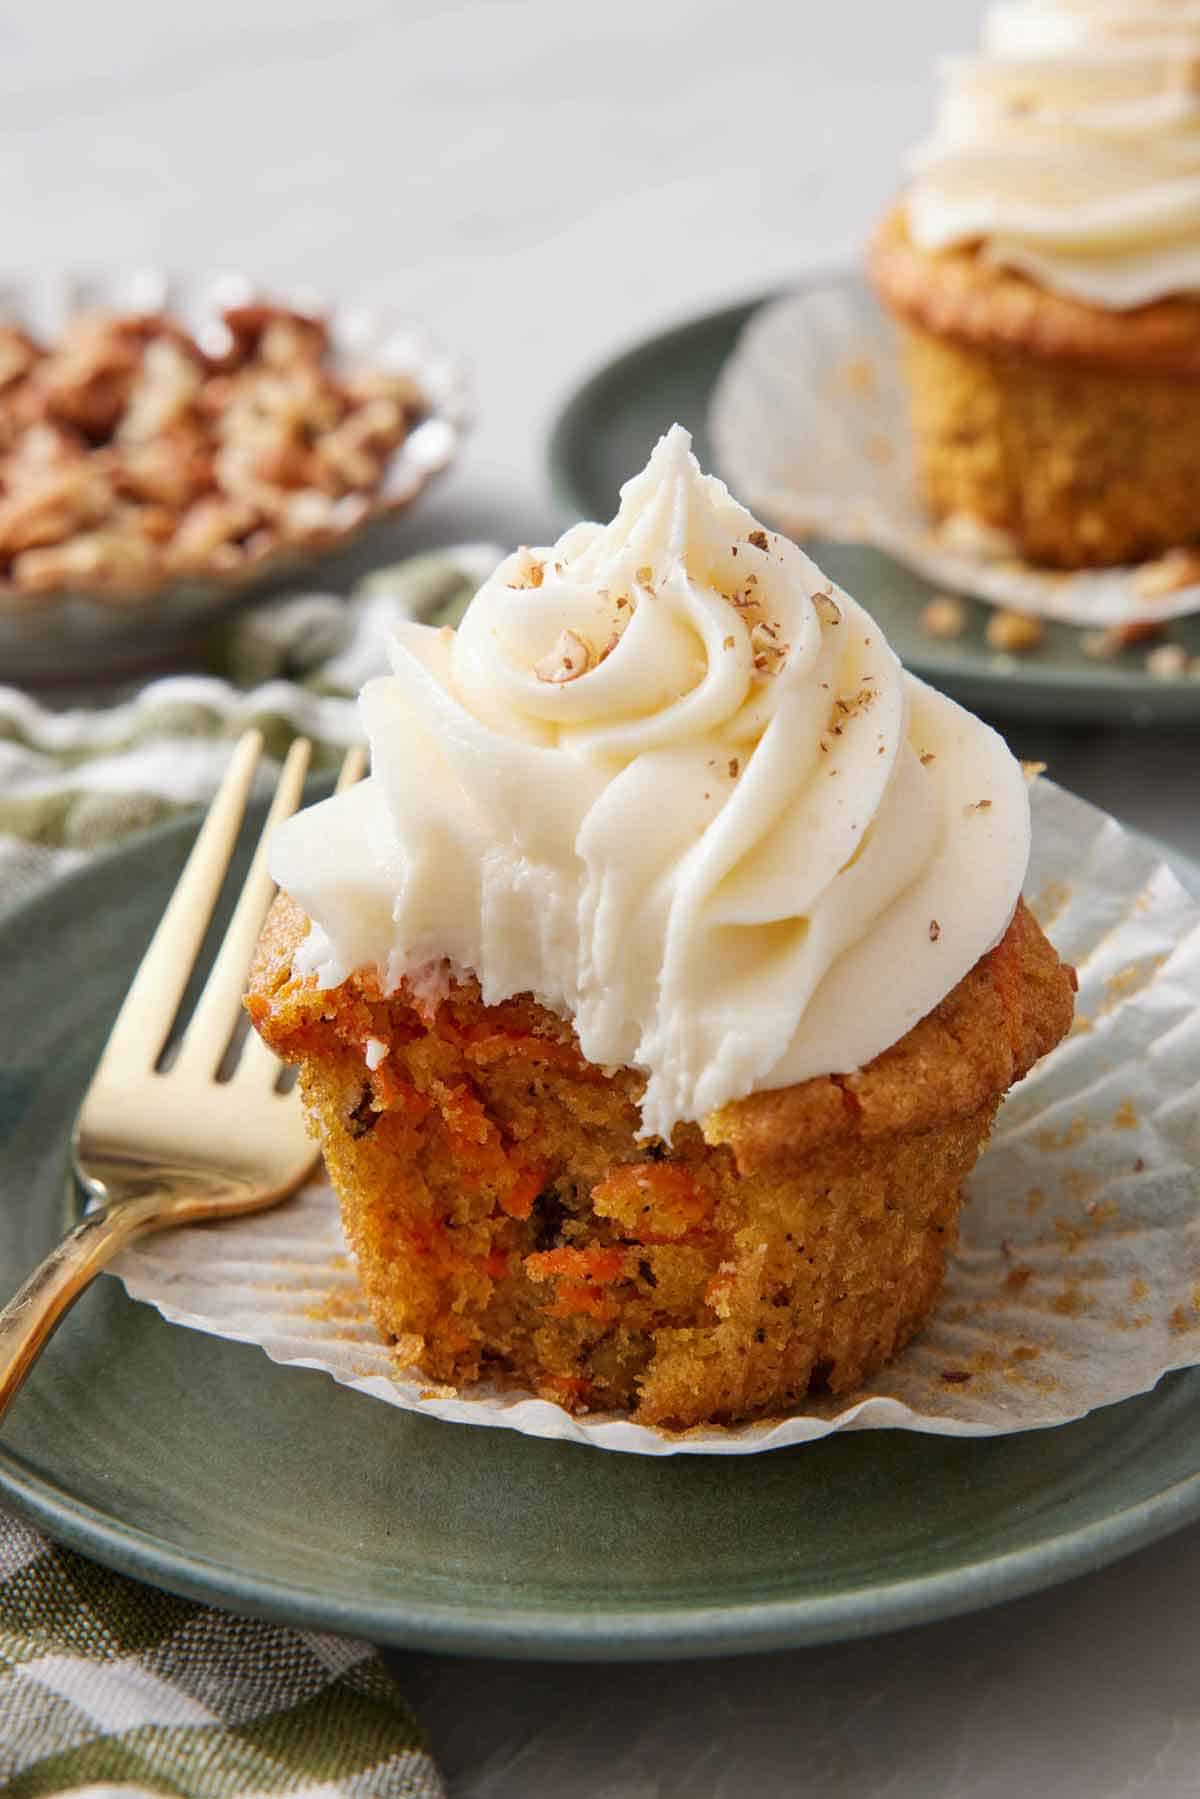 A carrot cake cupcake on a plate with the liner pulled down and a bite taken out of it.